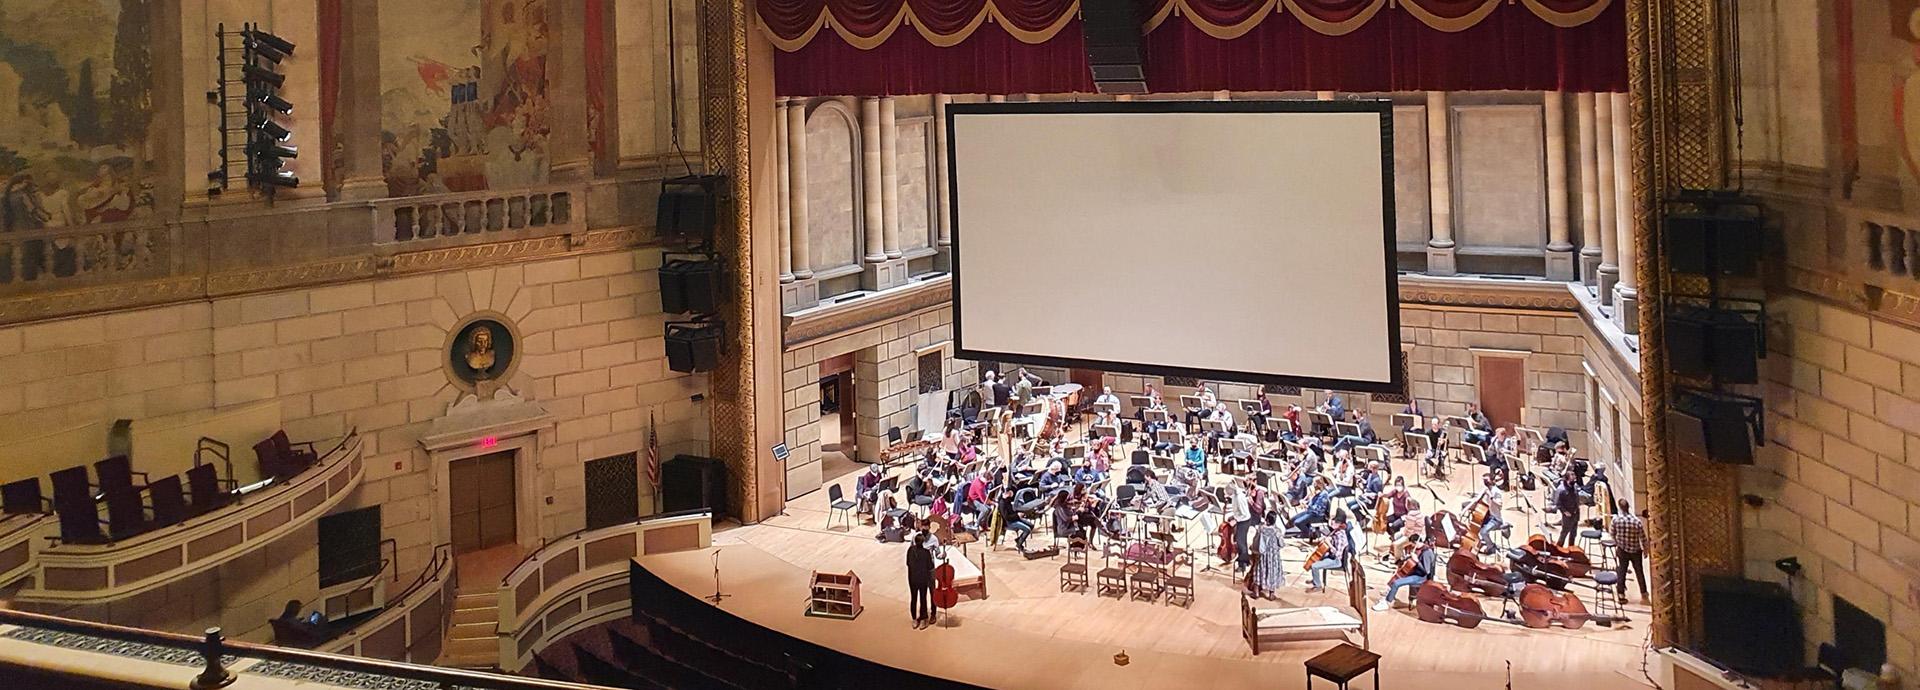 Photo of orchestra on a stage taken from the balcony of a music hall.